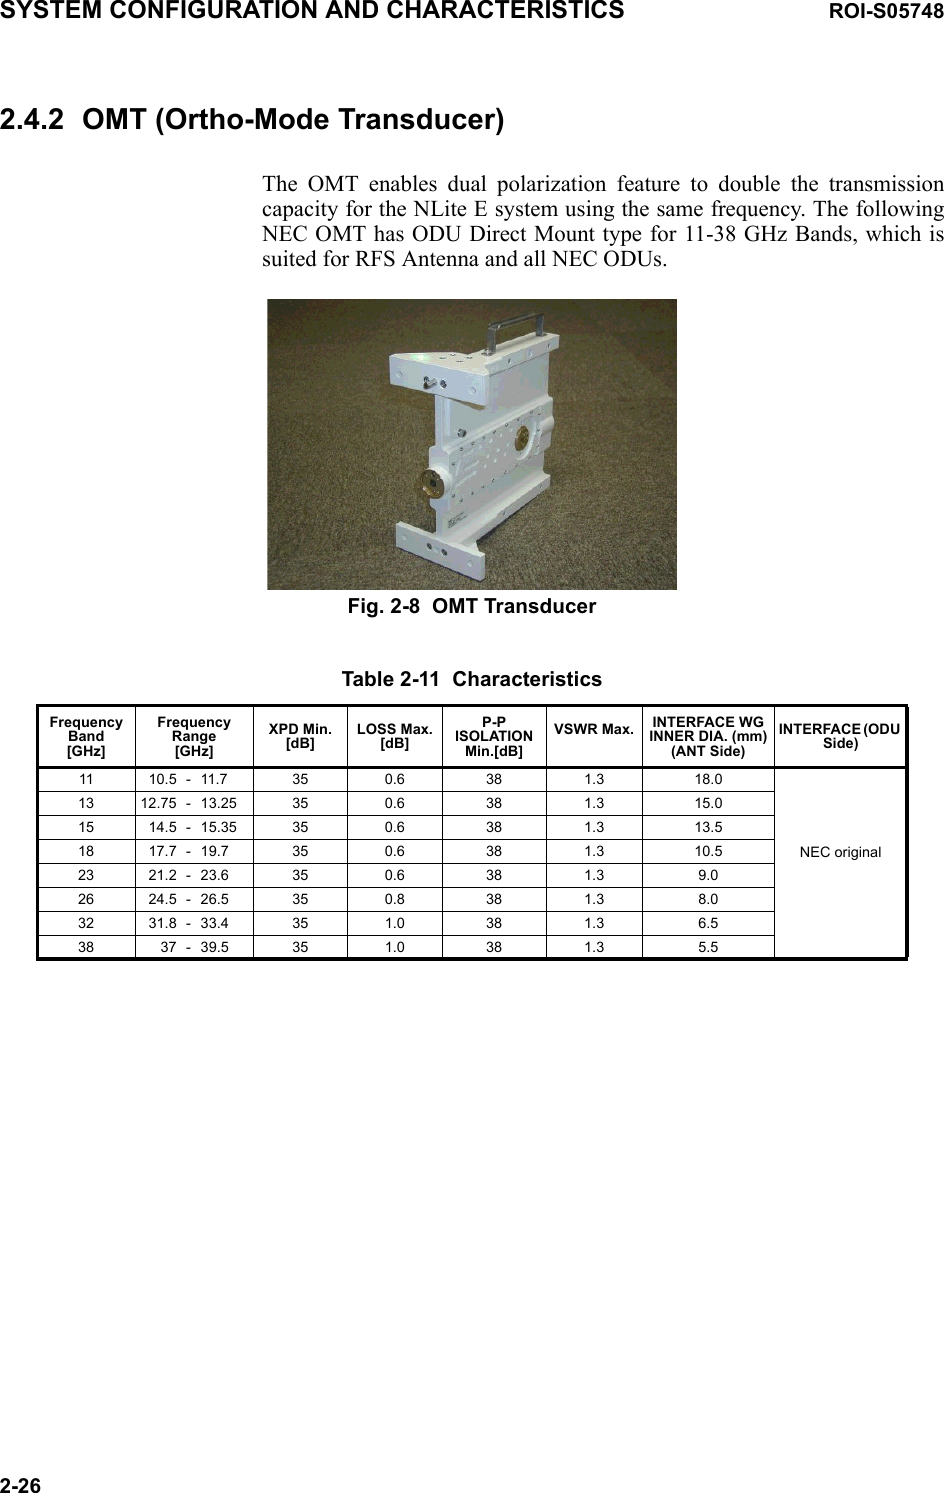 SYSTEM CONFIGURATION AND CHARACTERISTICS ROI-S057482-262.4.2 OMT (Ortho-Mode Transducer)The OMT enables dual polarization feature to double the transmission capacity for the NLite E system using the same frequency. The following NEC OMT has ODU Direct Mount type for 11-38 GHz Bands, which is suited for RFS Antenna and all NEC ODUs. Fig. 2-8  OMT TransducerTable 2-11  CharacteristicsFrequency Band[GHz]Frequency Range [GHz]XPD Min.[dB]LOSS Max.[dB] P-P ISOLATION Min.[dB]VSWR Max. INTERFACE WG INNER DIA. (mm)(ANT Side)INTERFACE (ODU Side)11 10.5 -11.7 35 0.6  38 1.3 18.0 NEC original13 12.75 -13.25 35 0.6 38 1.3 15.015 14.5 -15.35 35 0.6  38 1.3 13.5 18 17.7 -19.7 35 0.6  38 1.3 10.5 23 21.2 -23.6 35 0.6  38 1.3 9.0 26 24.5 -26.5 35 0.8  38 1.3 8.0 32 31.8 -33.4 35 1.0 38 1.3 6.538 37 -39.5 35 1.0  38 1.3 5.5 